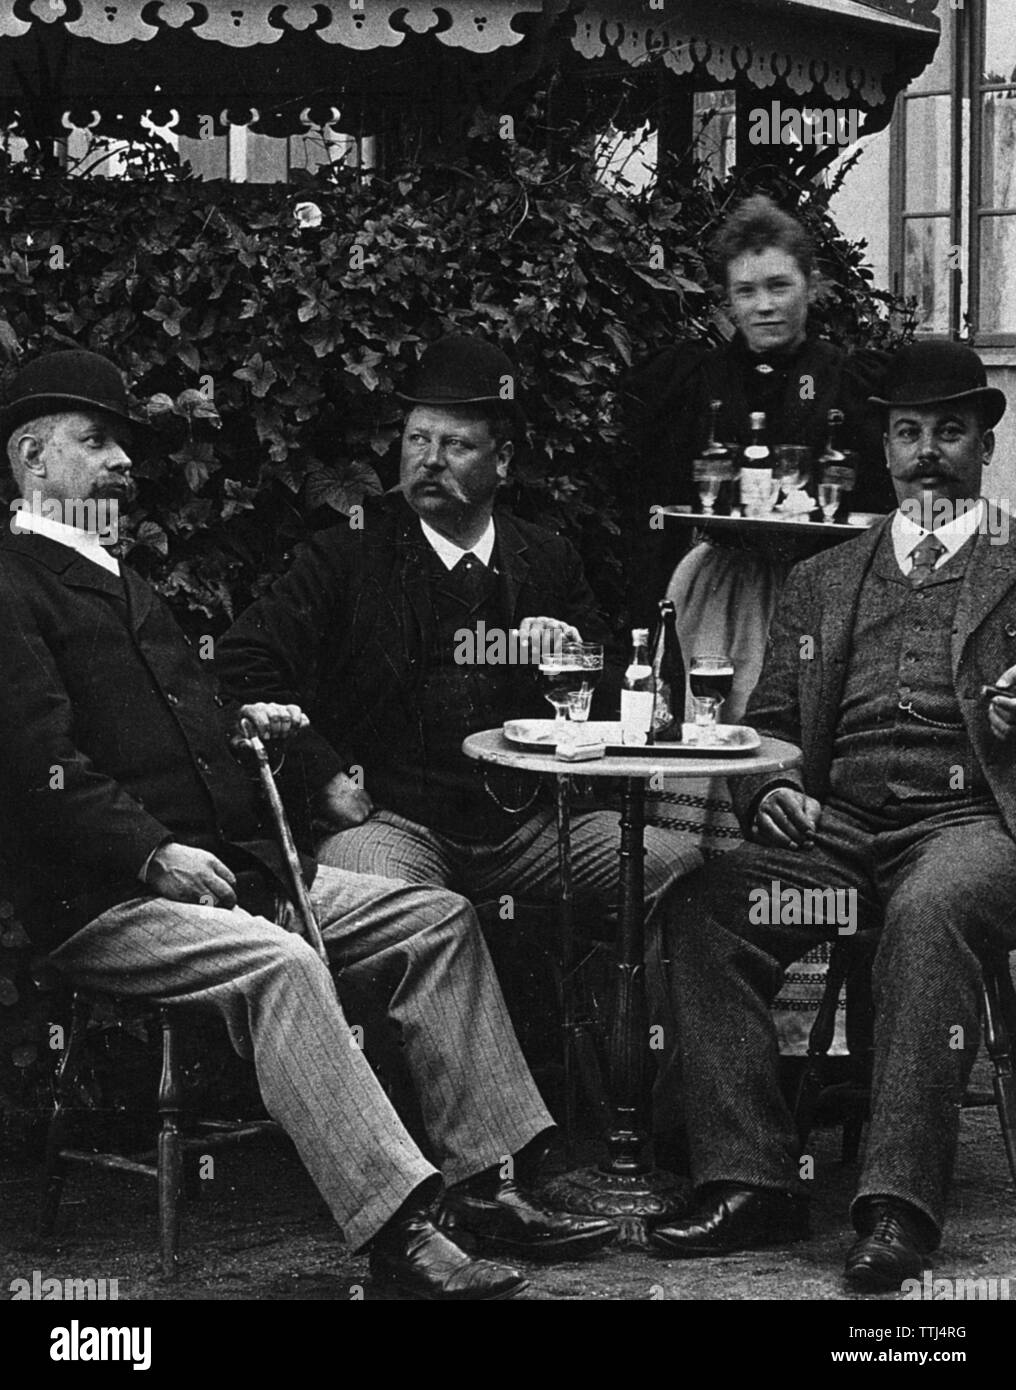 Men's lifestyle in the beginning of the 20th century. Three men are sitting at a table at a restaurant enjoying a glass of beer. They are all three typically well dressed and hats are on.  Sweden 1800-1900 BV67-3 Stock Photo